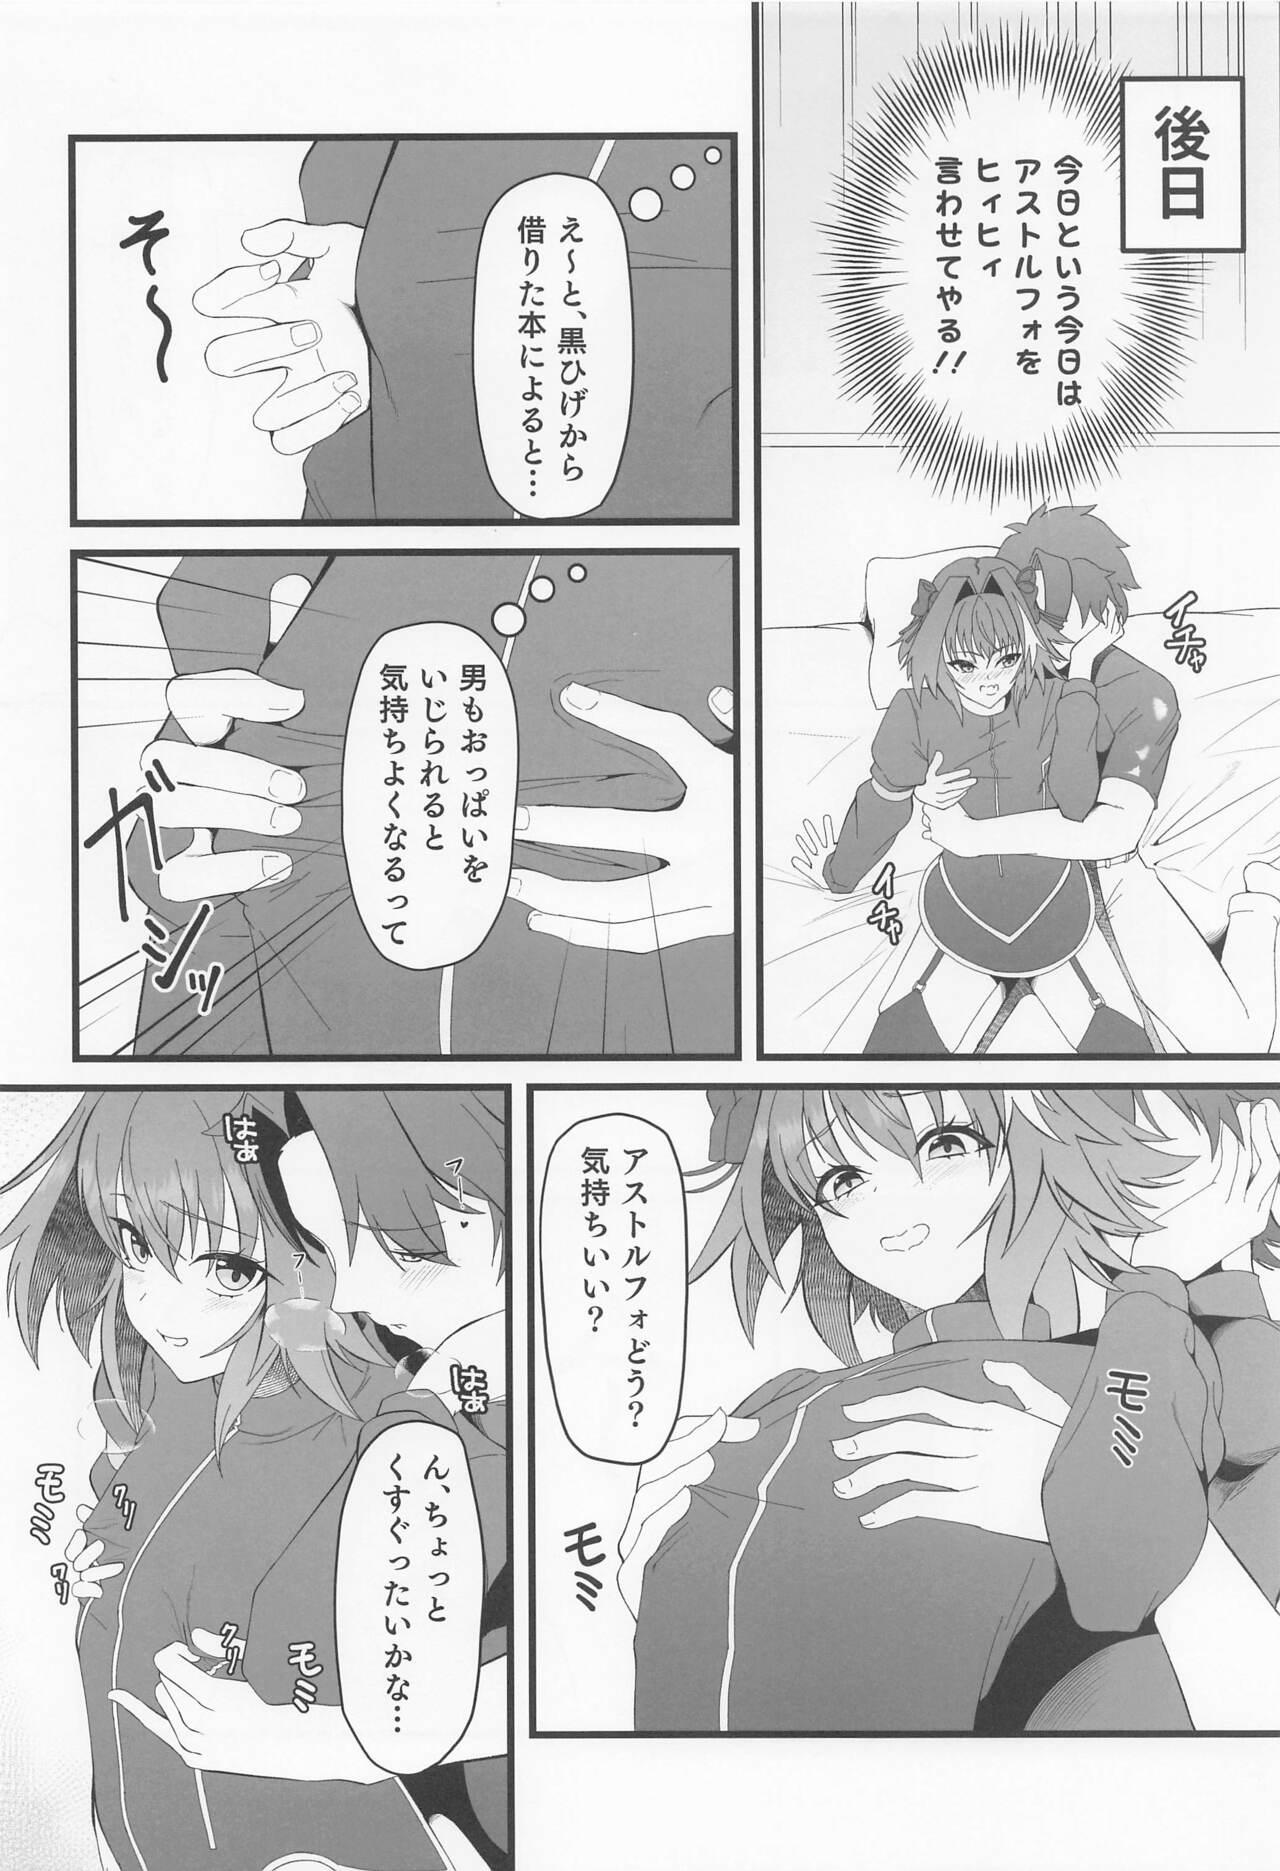 Arabe Kimi no Ichiban ni Naritakute - I wanted to be your number one. - Fate grand order Pigtails - Page 5